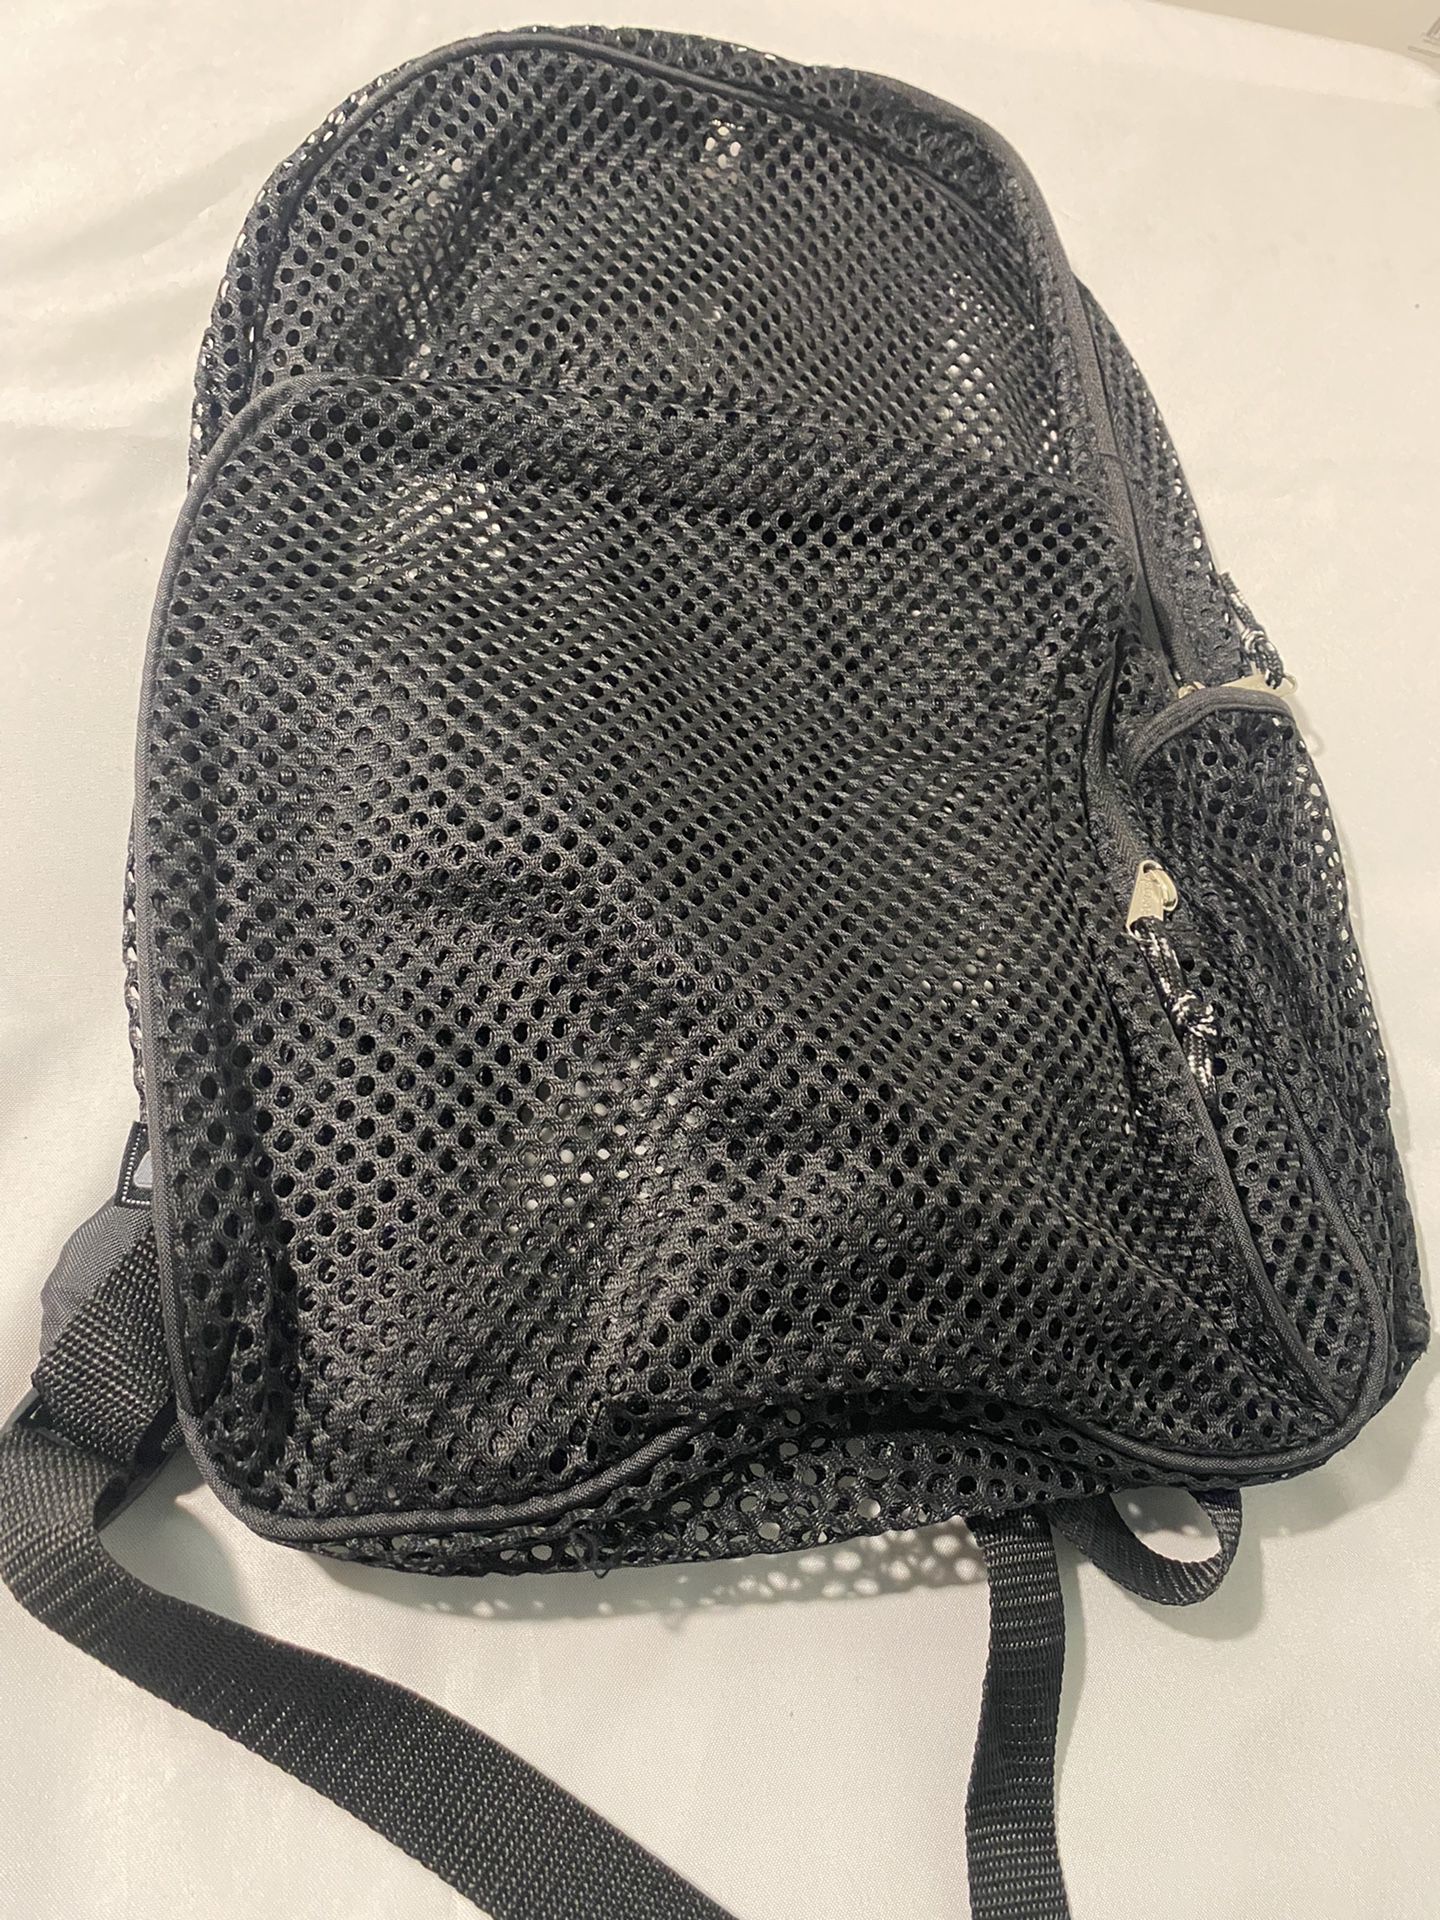 Eastsport Mesh Backpack  , New  No Tags  , For School  Or Gym .